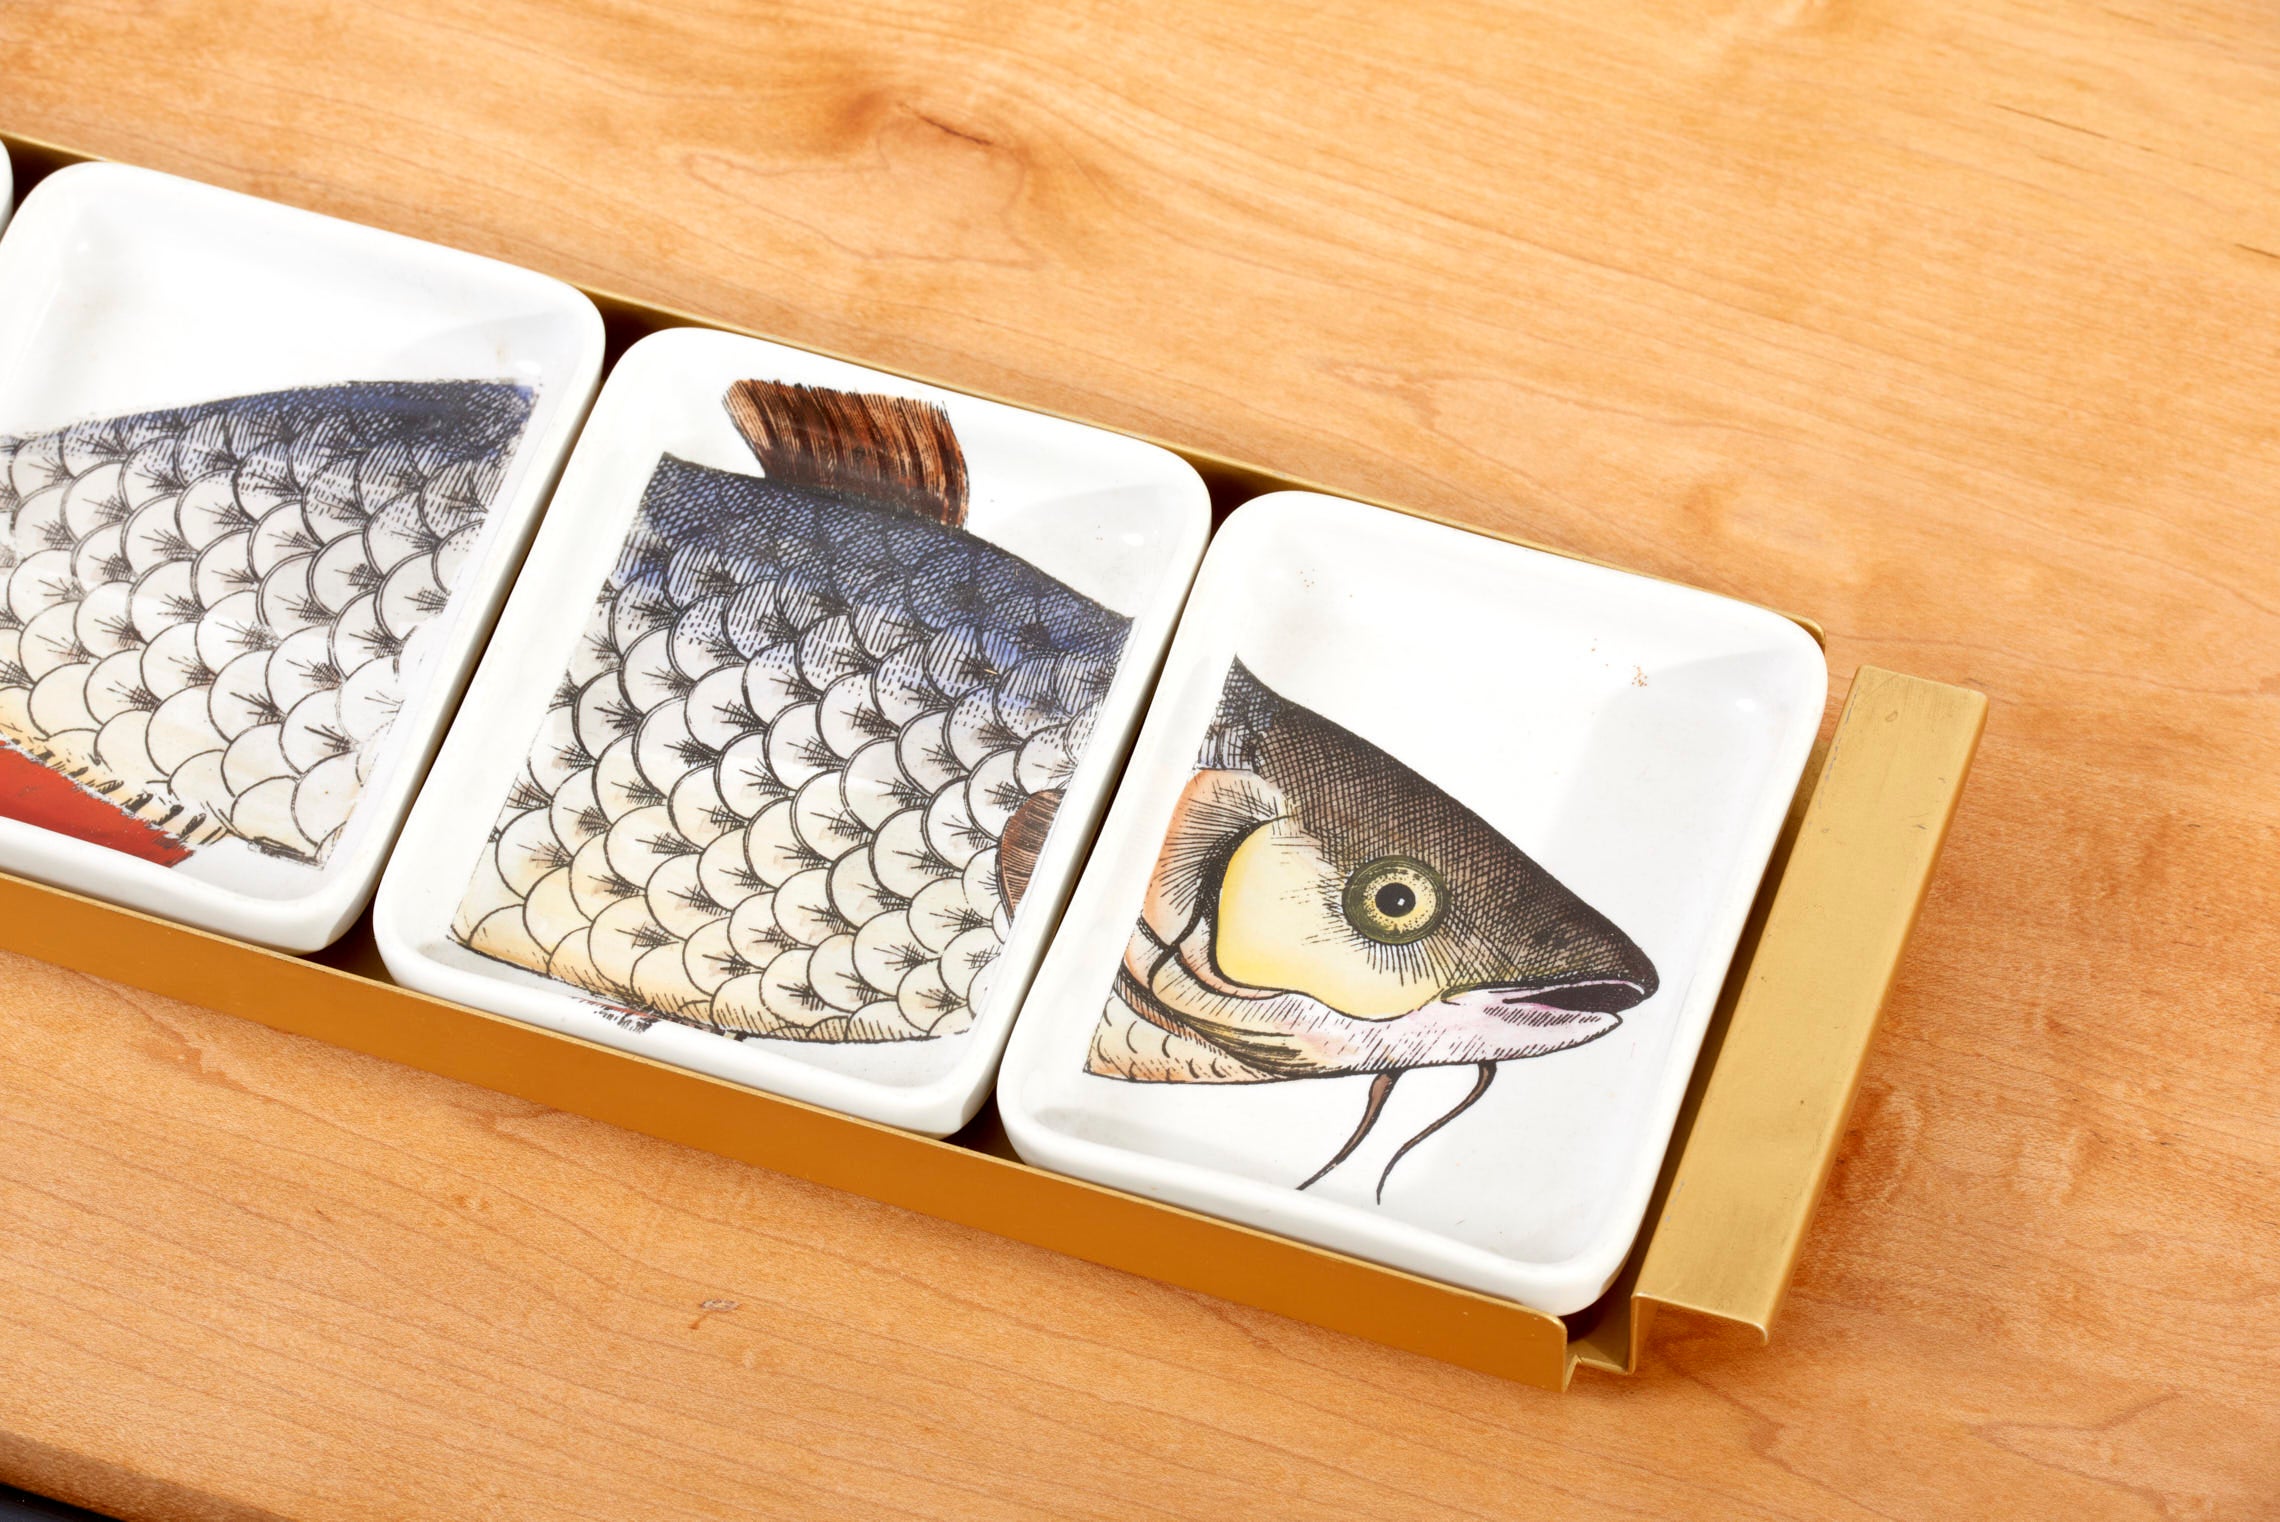 Set of four Fornasetti Fish Bowls on a Tray, Italy 1950s. The measurements given apply to the tray. One bowl measures 11 x 14 x 3 cm.